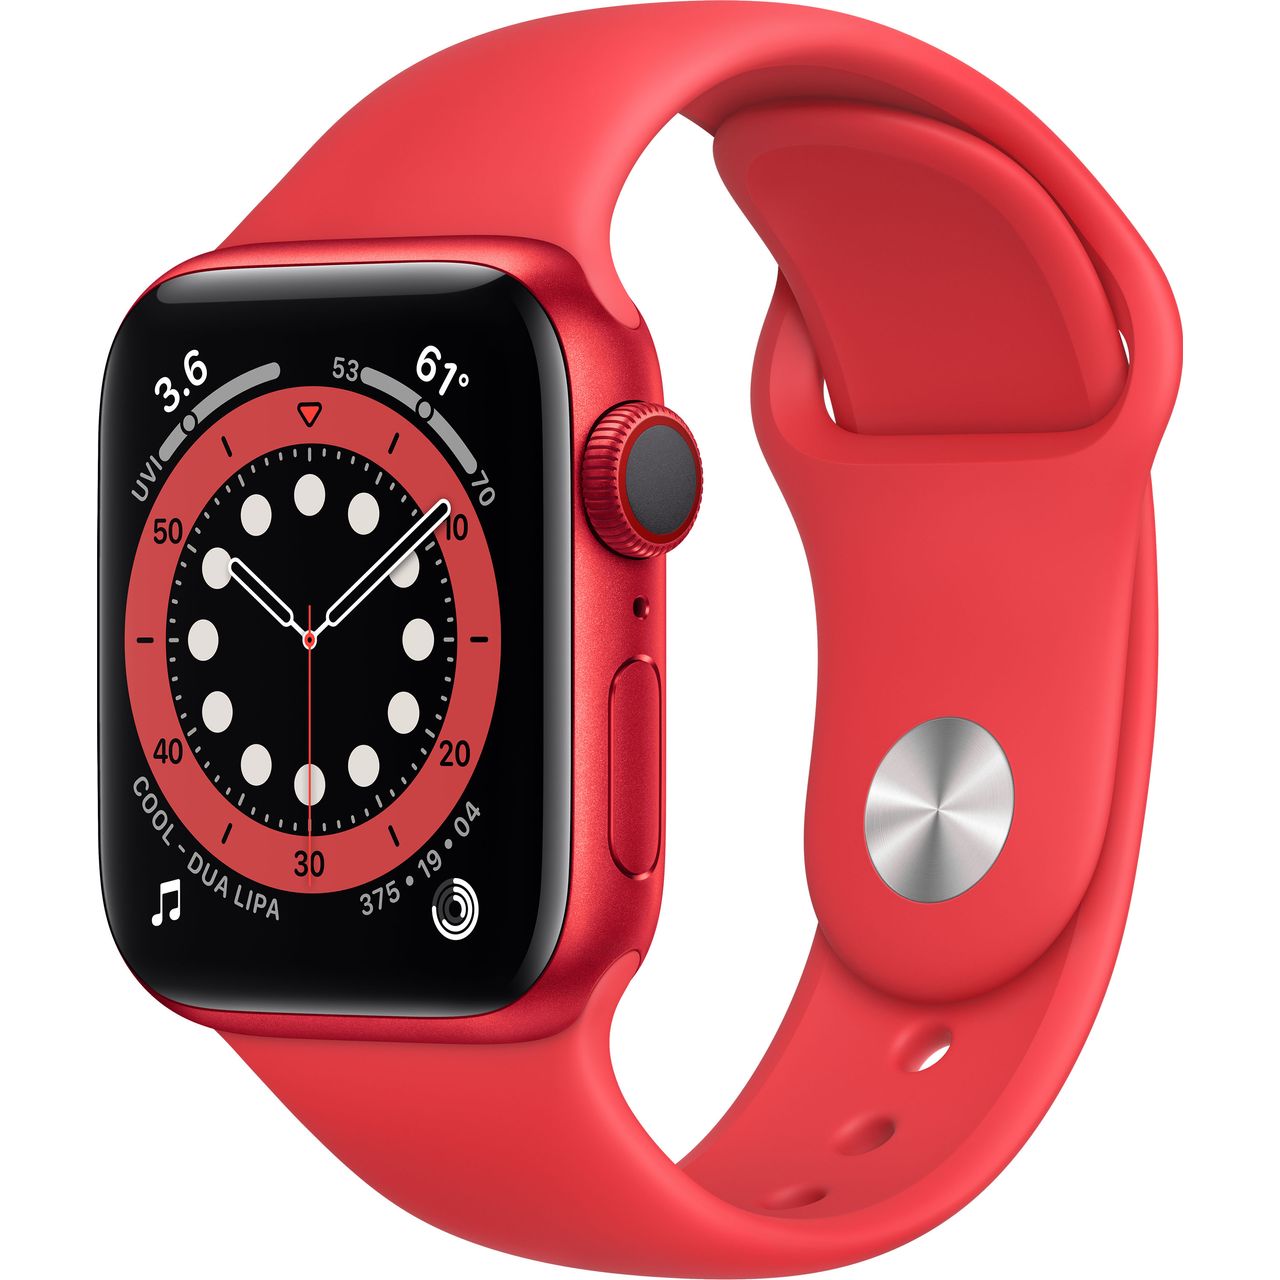 Apple Watch Series 6, 40mm, GPS + Cellular [2020] Review